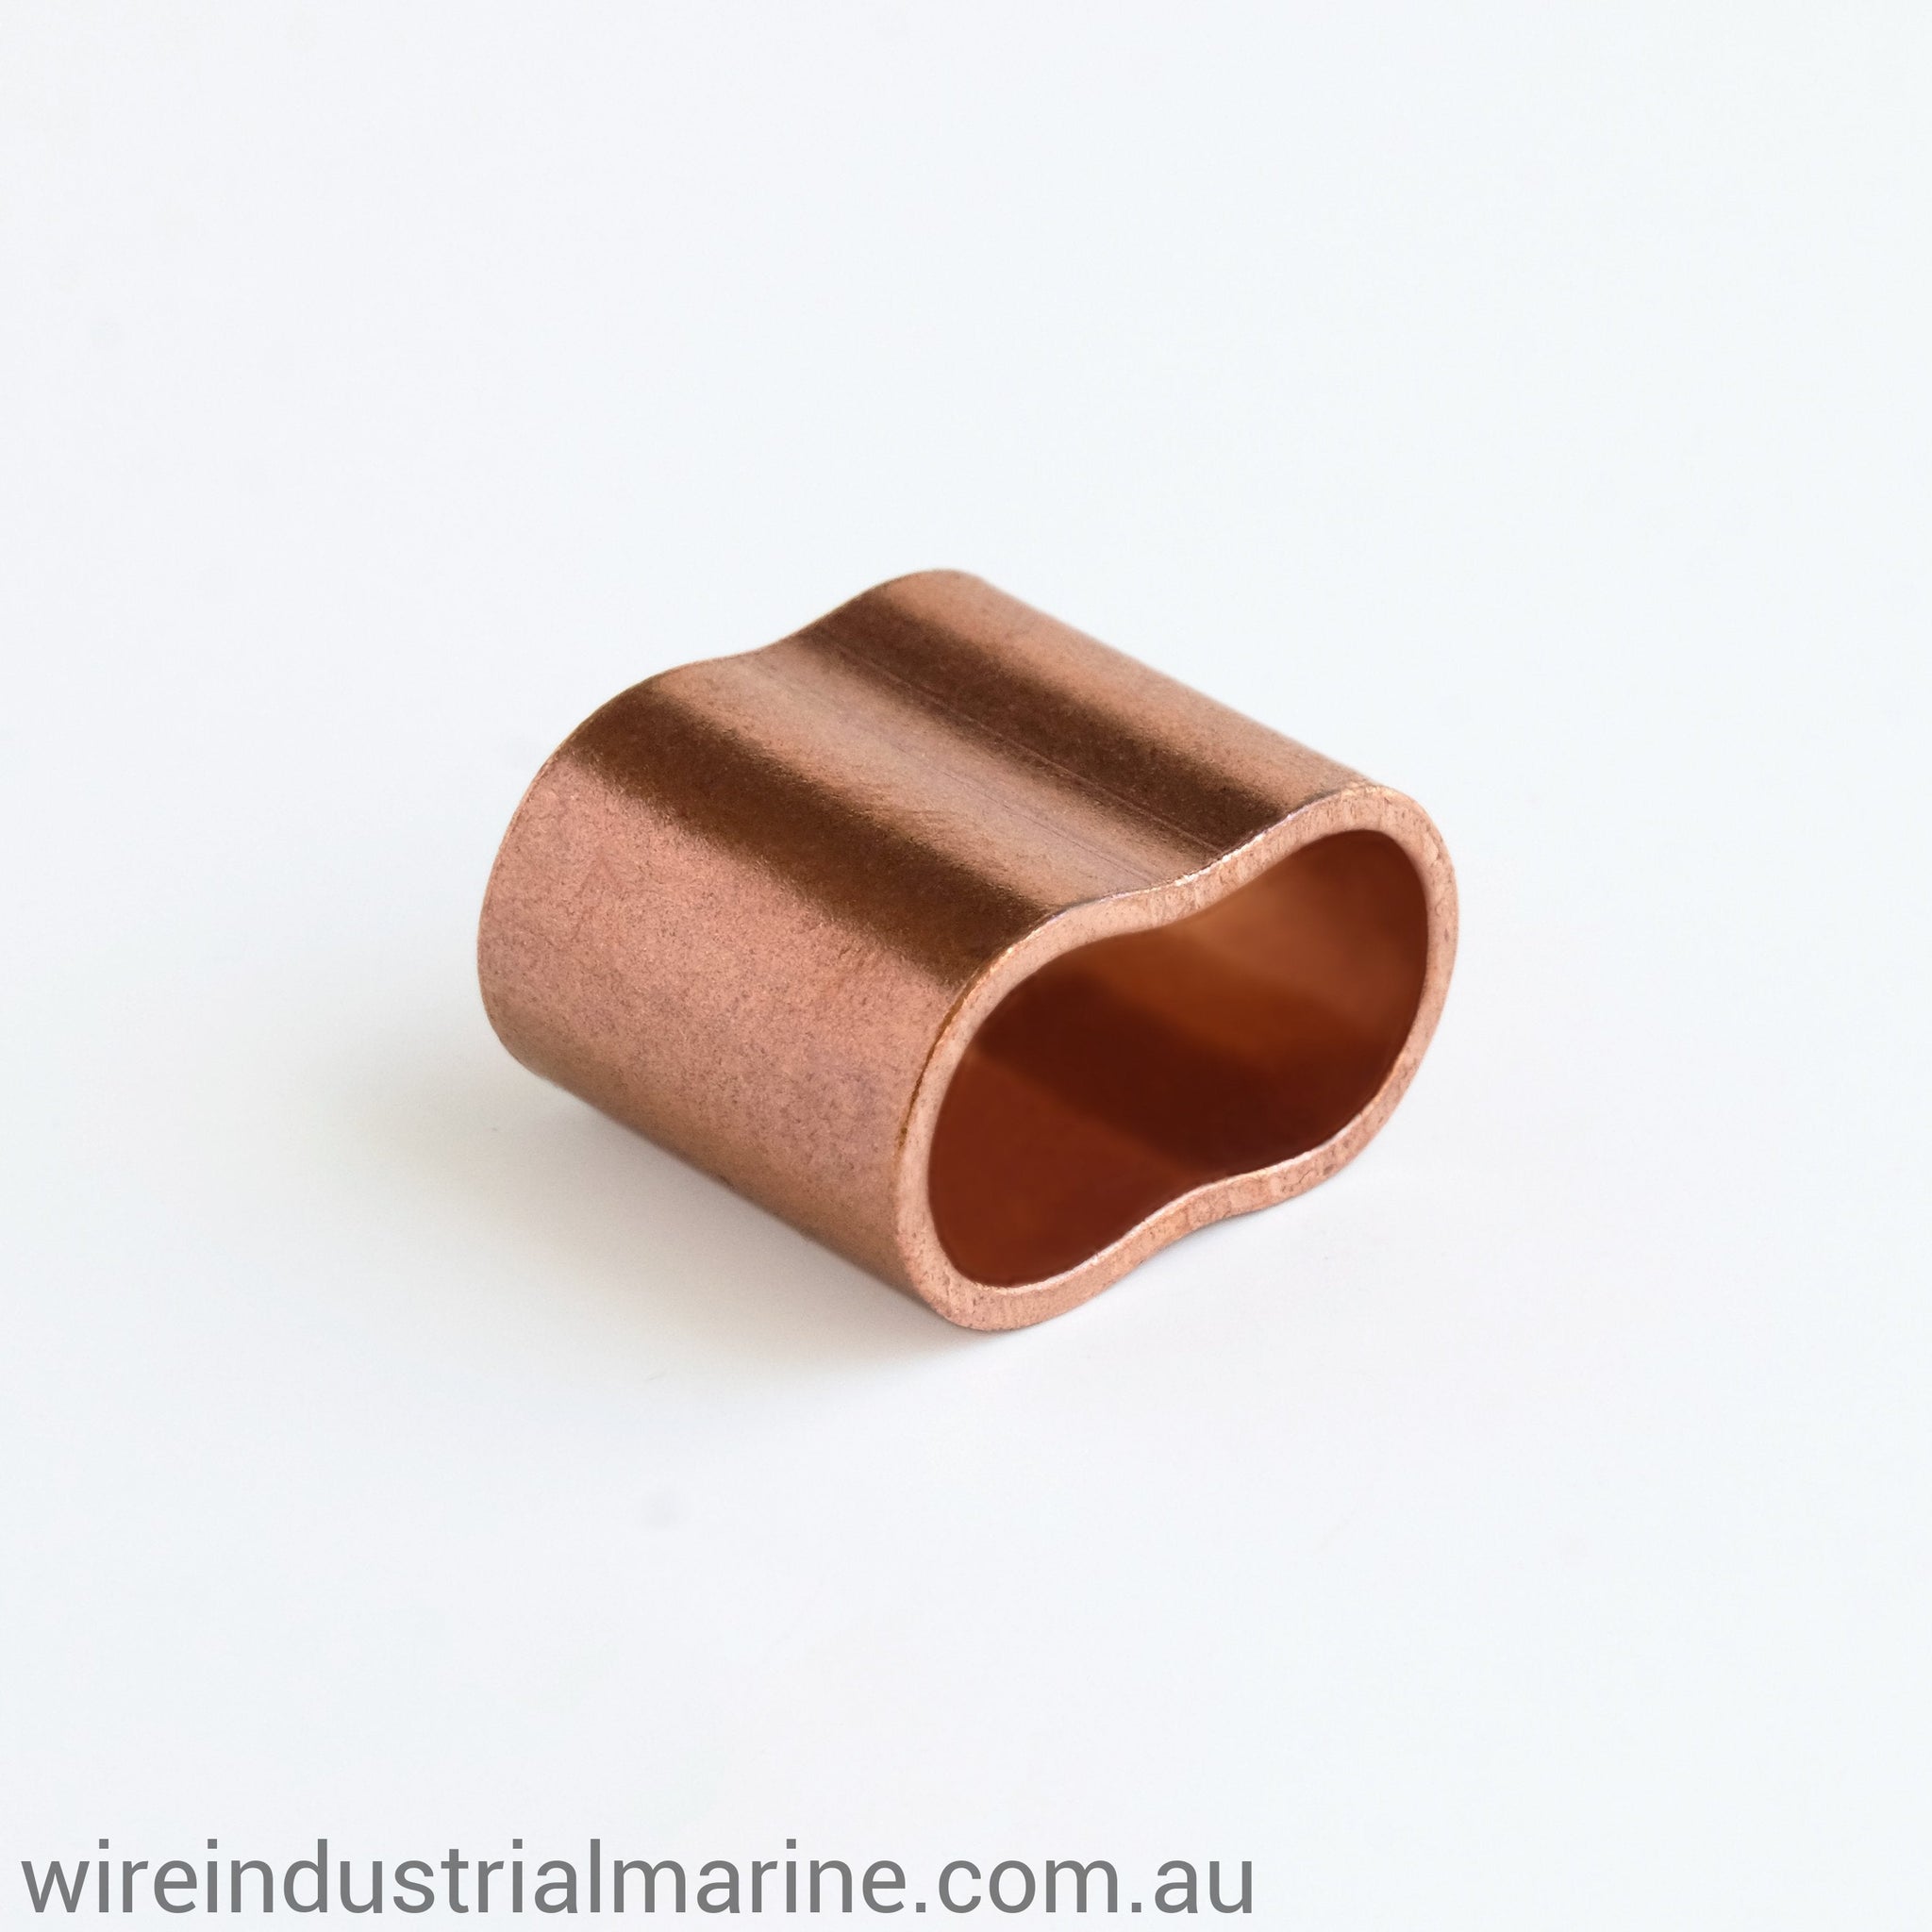 7mm Copper swage for fibre rope-CRS-7.0-wireindustrialmarine